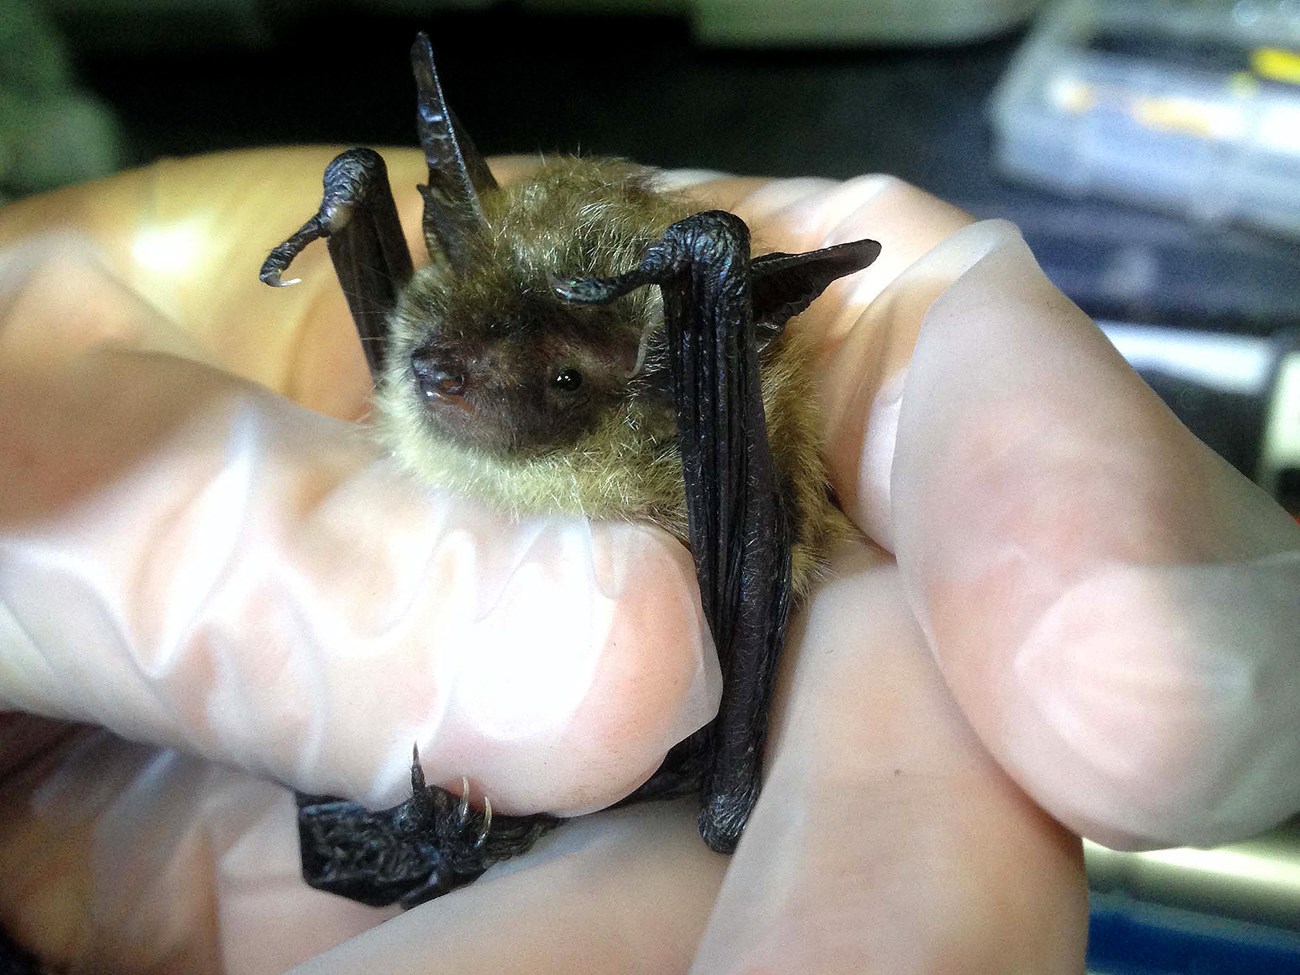 Small, fuzzy bat with long ears, gently held in a between rubber-gloved fingers.